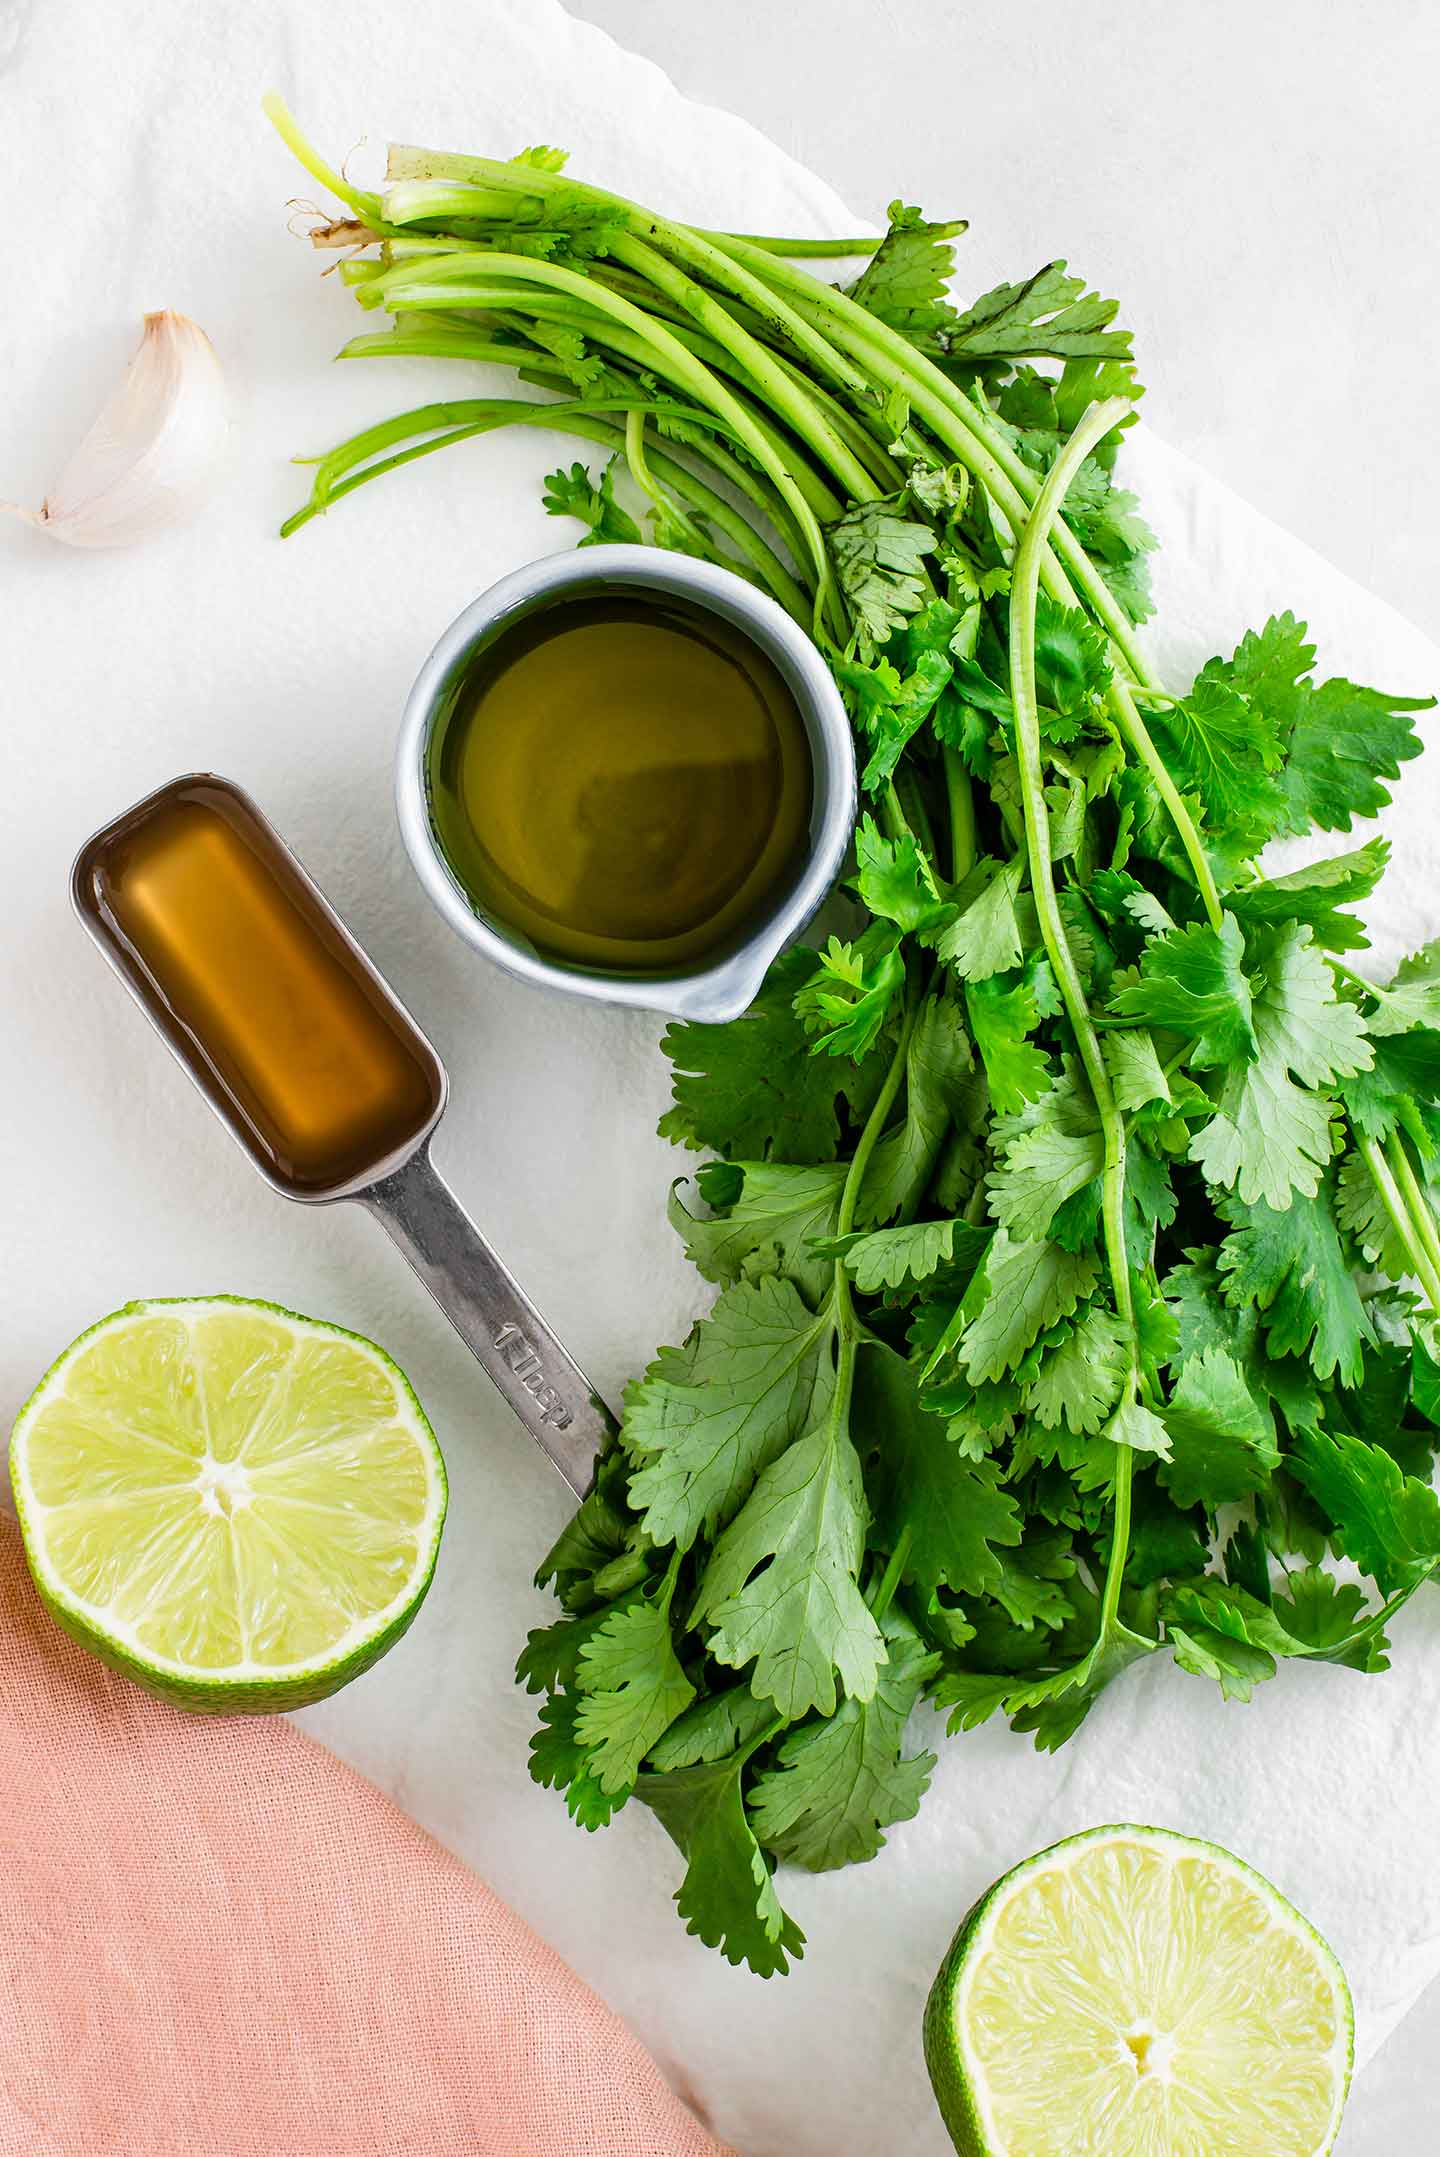 Top down view of cilantro, a sliced lime, a clove of garlic, a tablespoon of apple cider vinegar and a small dish of olive oil on a white tray.